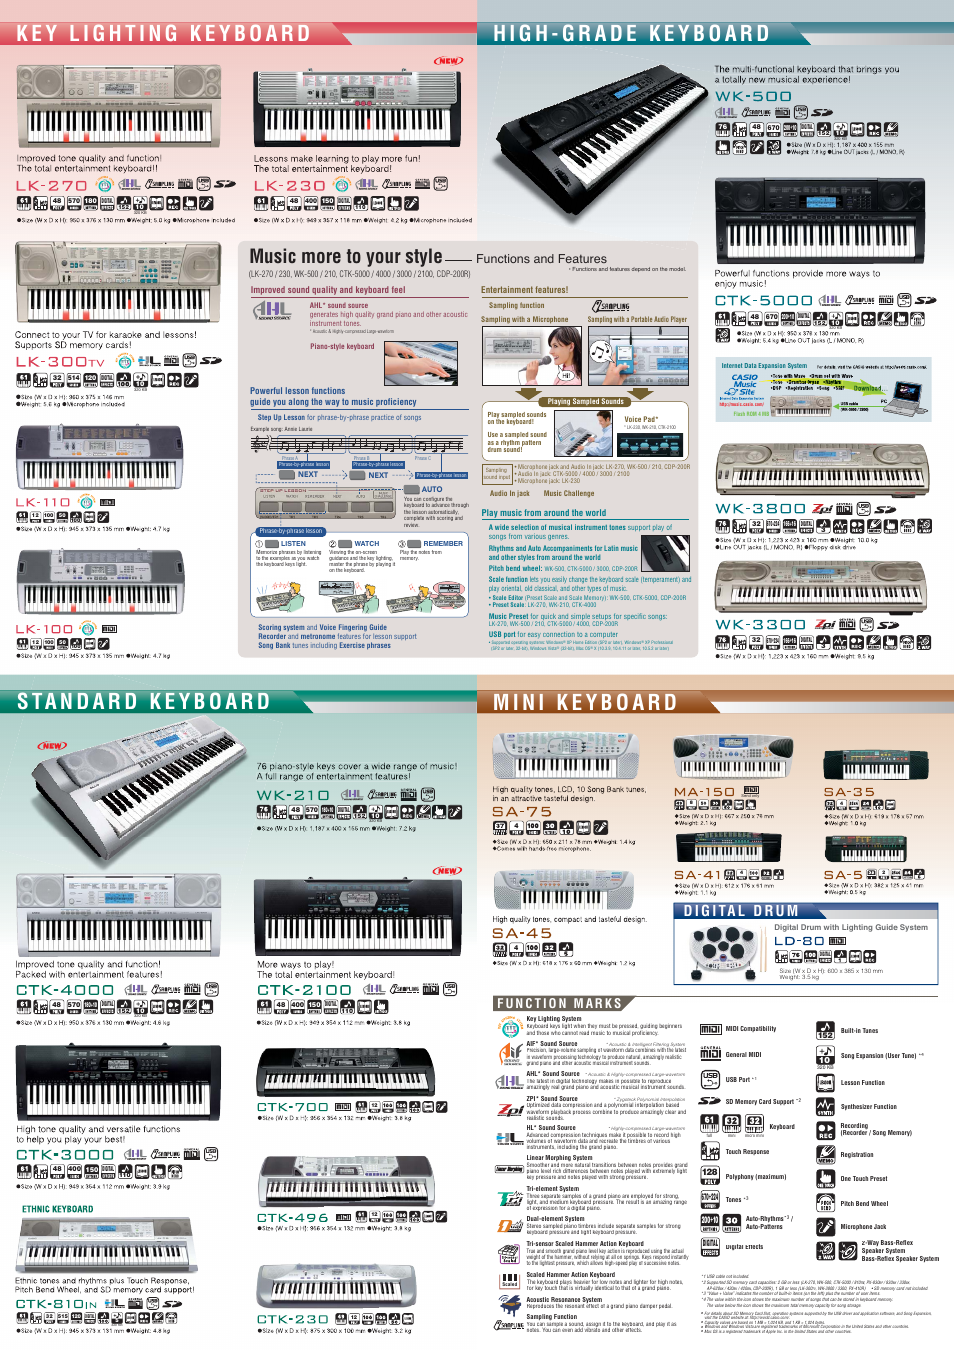 Music more to your style, Functions and features | Casio LK-230 User Manual  | Page 2 / 2 | Original mode